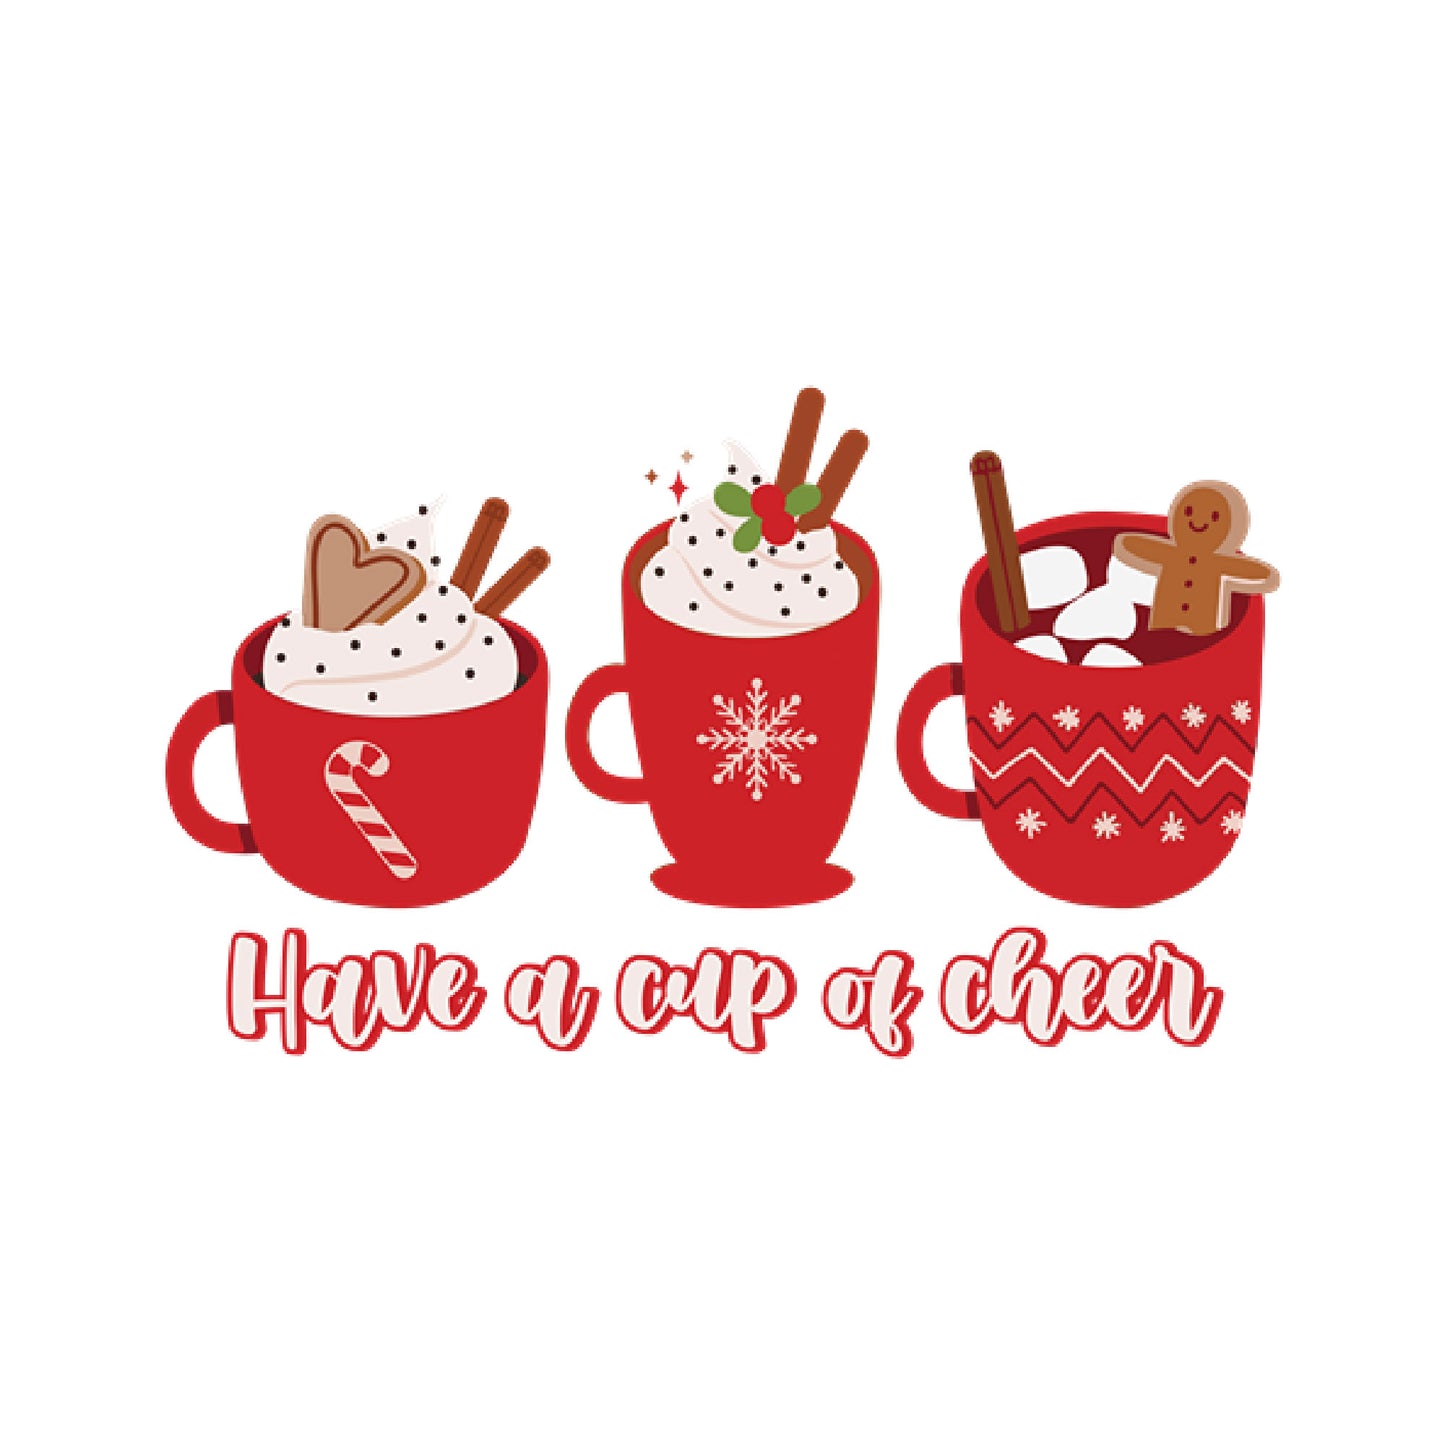 Savor the Season: 'Have a Cup of Cheer' Tee with Whipped Cream, Marshmallow, and Cookies Trio.